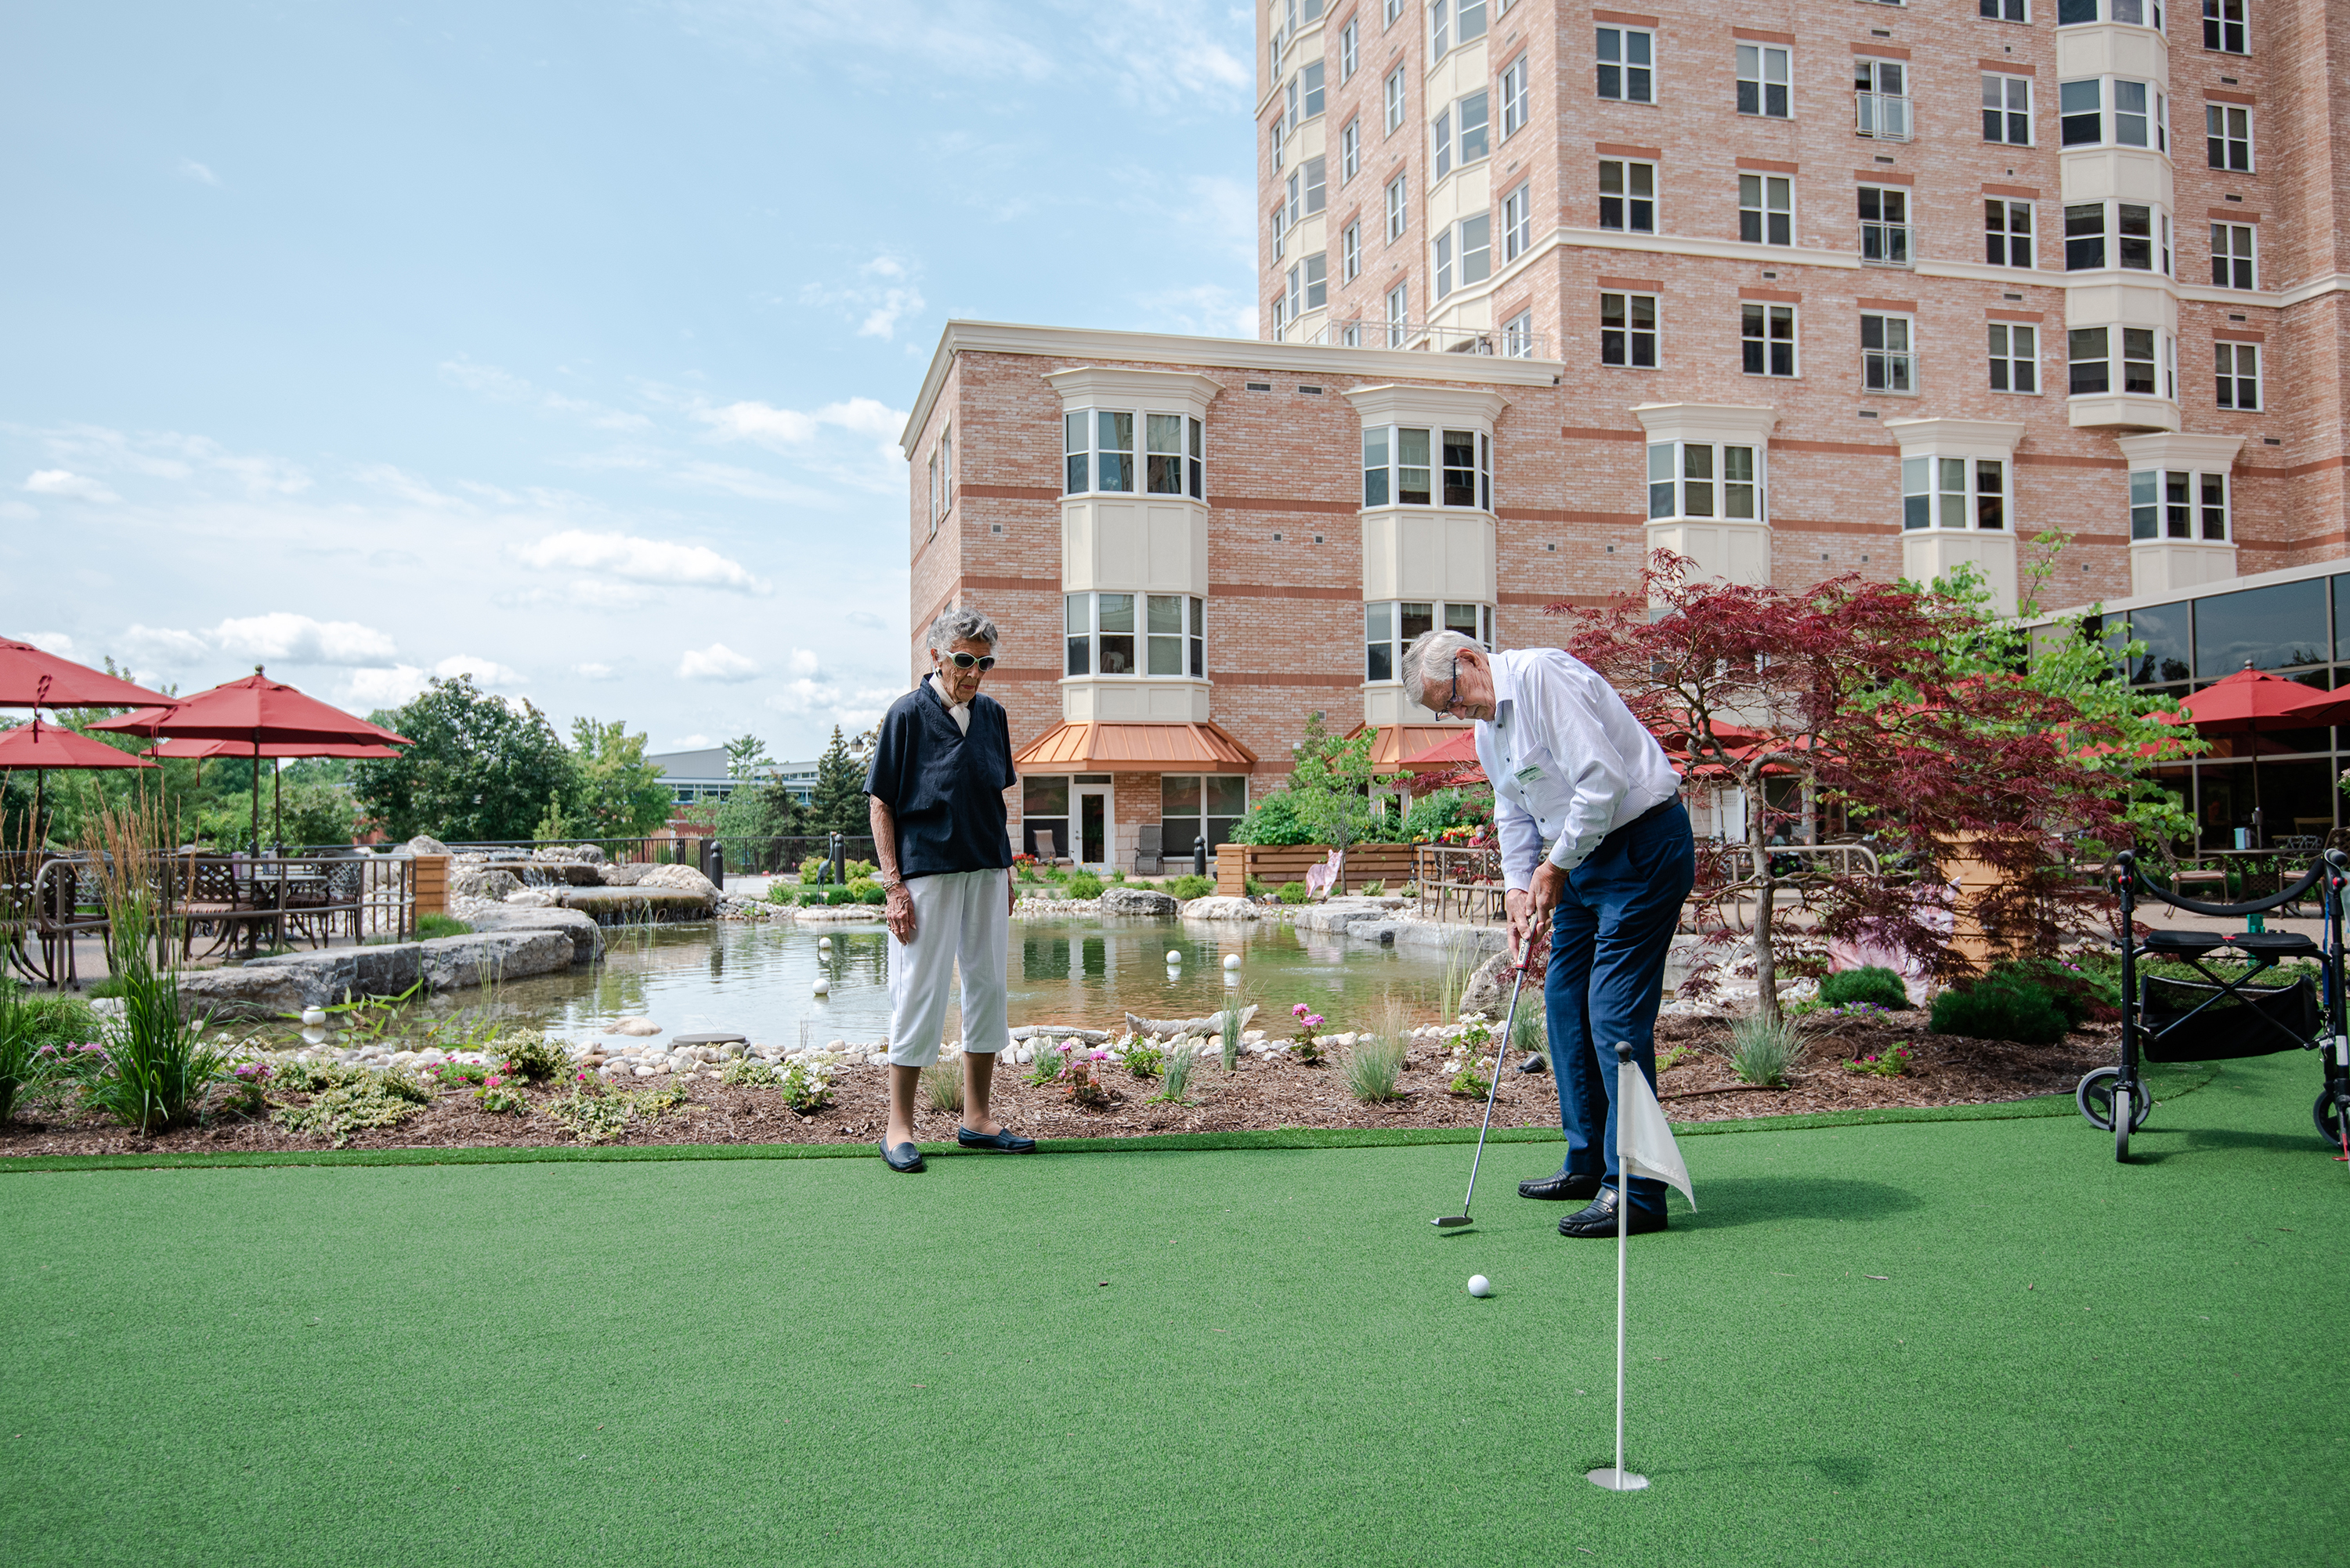 Two residents putting on the golf green in the Courtyard